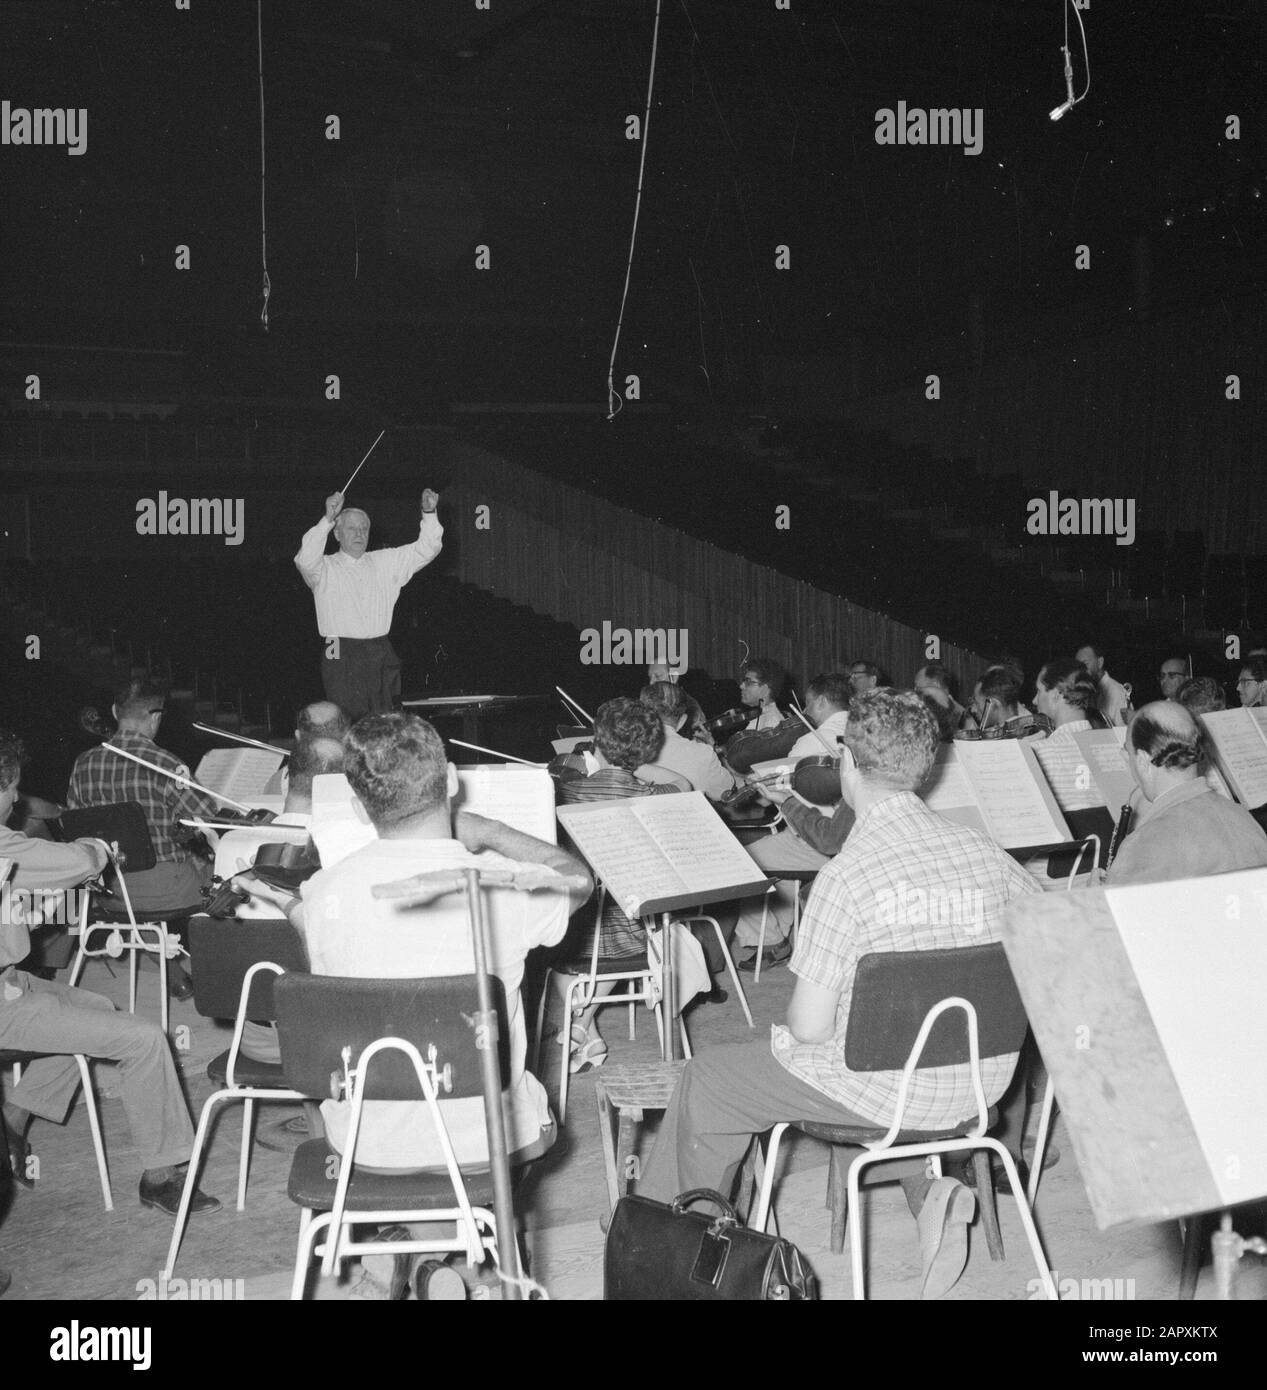 Israel 1964-1965: Tel Aviv, orchestra  Tel Aviv. Rehearsal of an orchestra, presumably the Israel Philharmonic Orchestra, conducted by Charles Munch in the Fredric R. Mann auditorium Date: 1964 Location: Israel, Tel Aviv Keywords: conductors, interior, classical music, musicians, musical instruments, orchestras Personal name: Munch, Charles  : Poll, Willem van de, Stock Photo